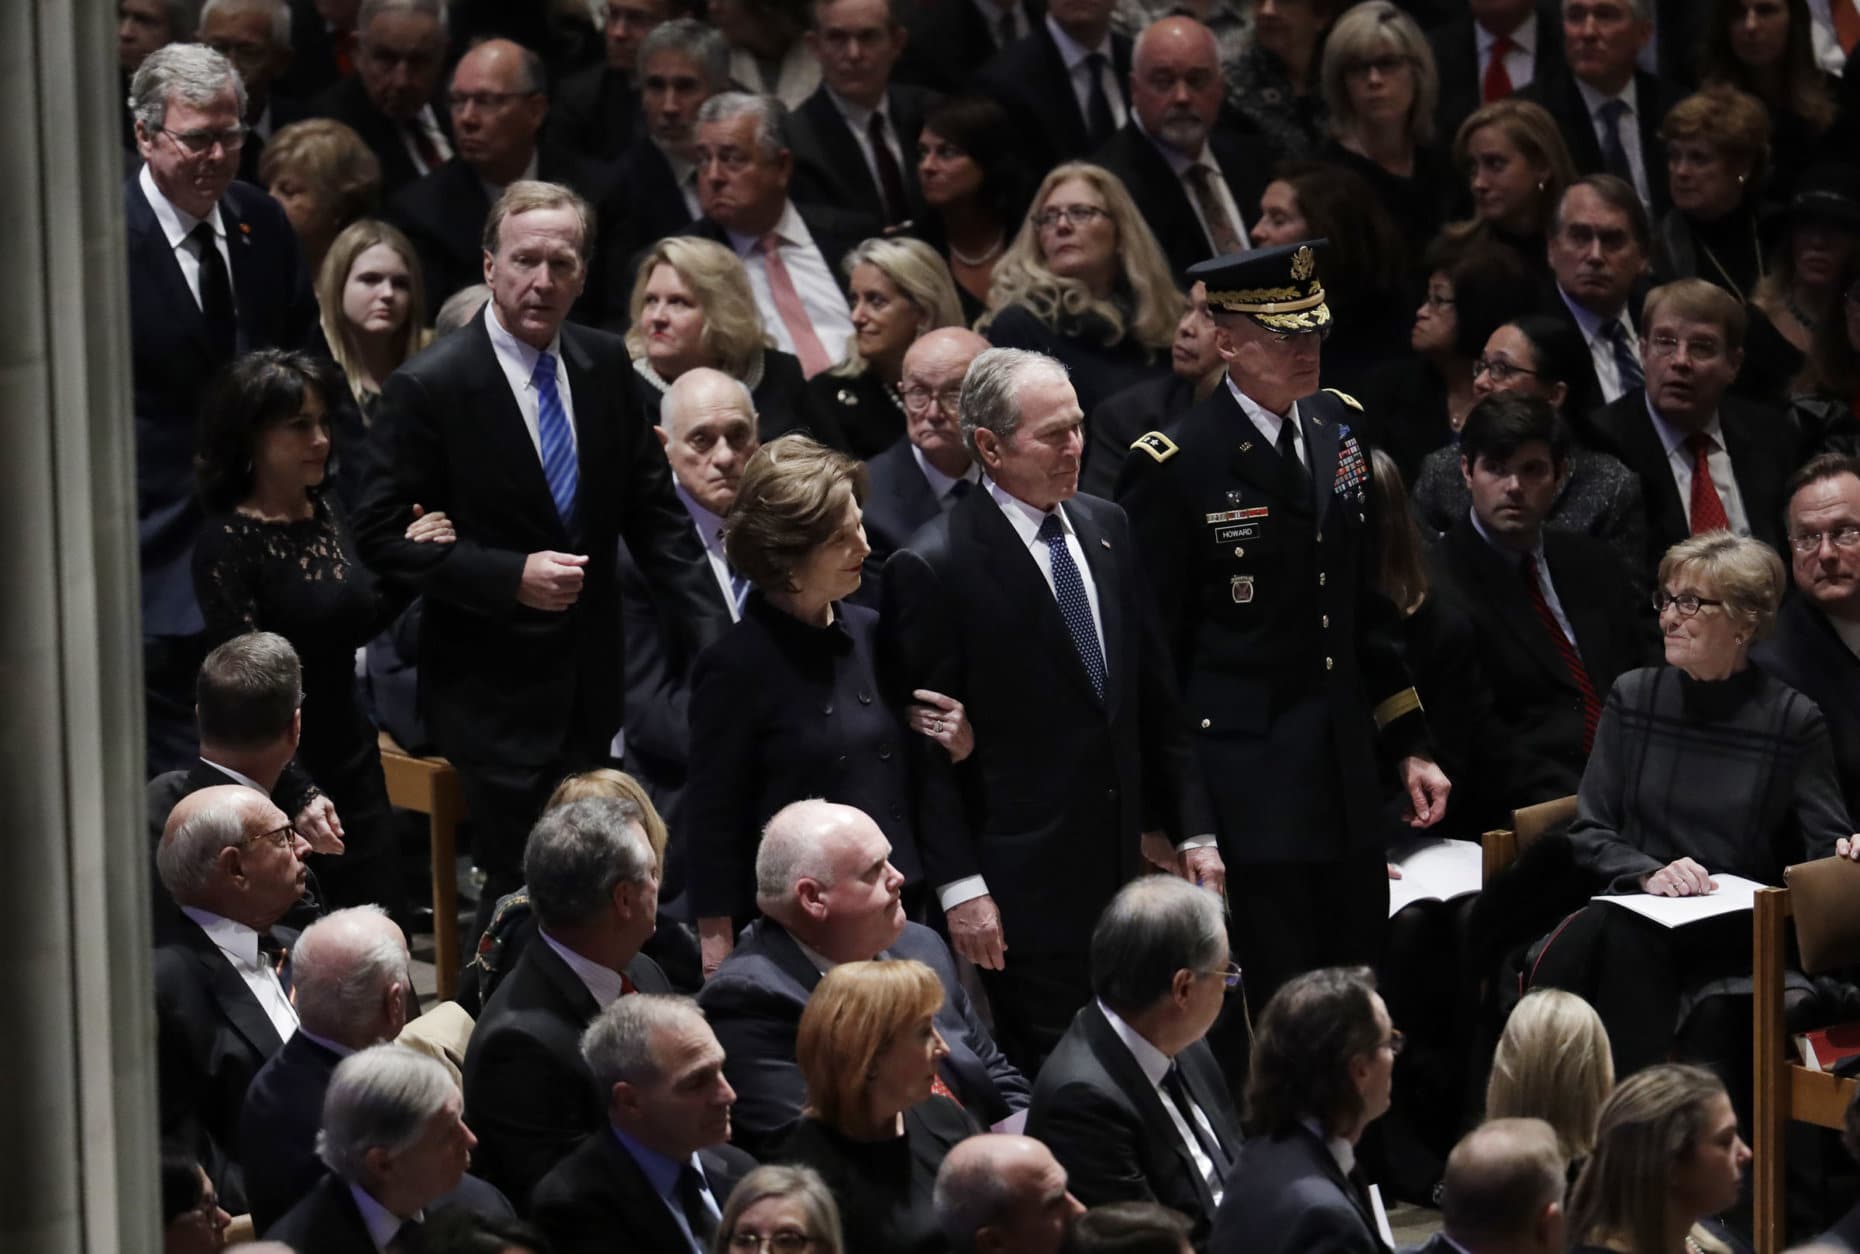 Former President George W. Bush, center, former first lady Laura Bush, Neil Bush, Sharon Bush and Jeb Bush, arrive for the State Funeral for former President George H.W. Bush, at the National Cathedral, Wednesday, Dec. 5, 2018, in Washington. (AP Photo/Evan Vucci)